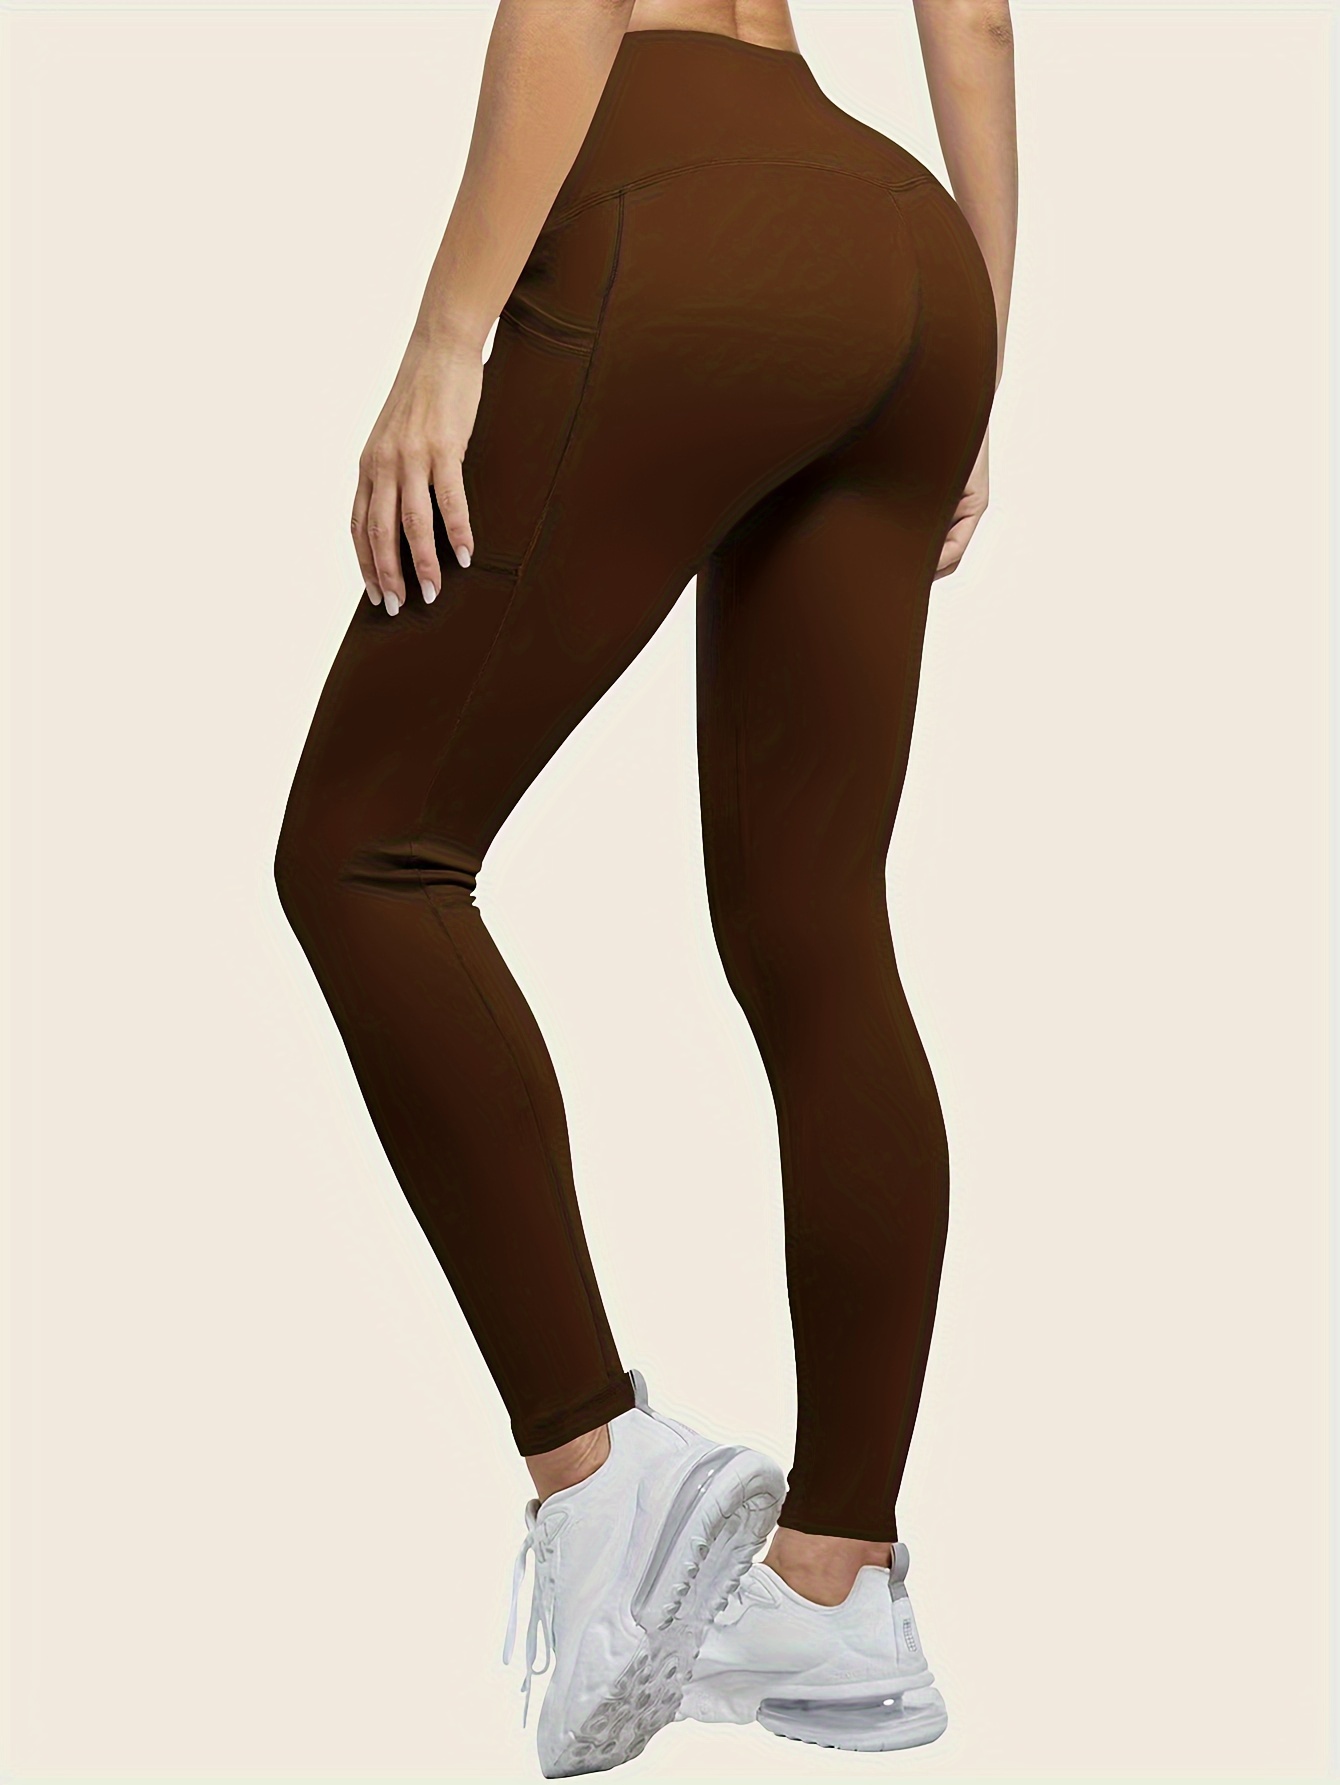 Fast and Free High-Rise Thermal Tight 25 *Pockets, Women's Leggings/Tights